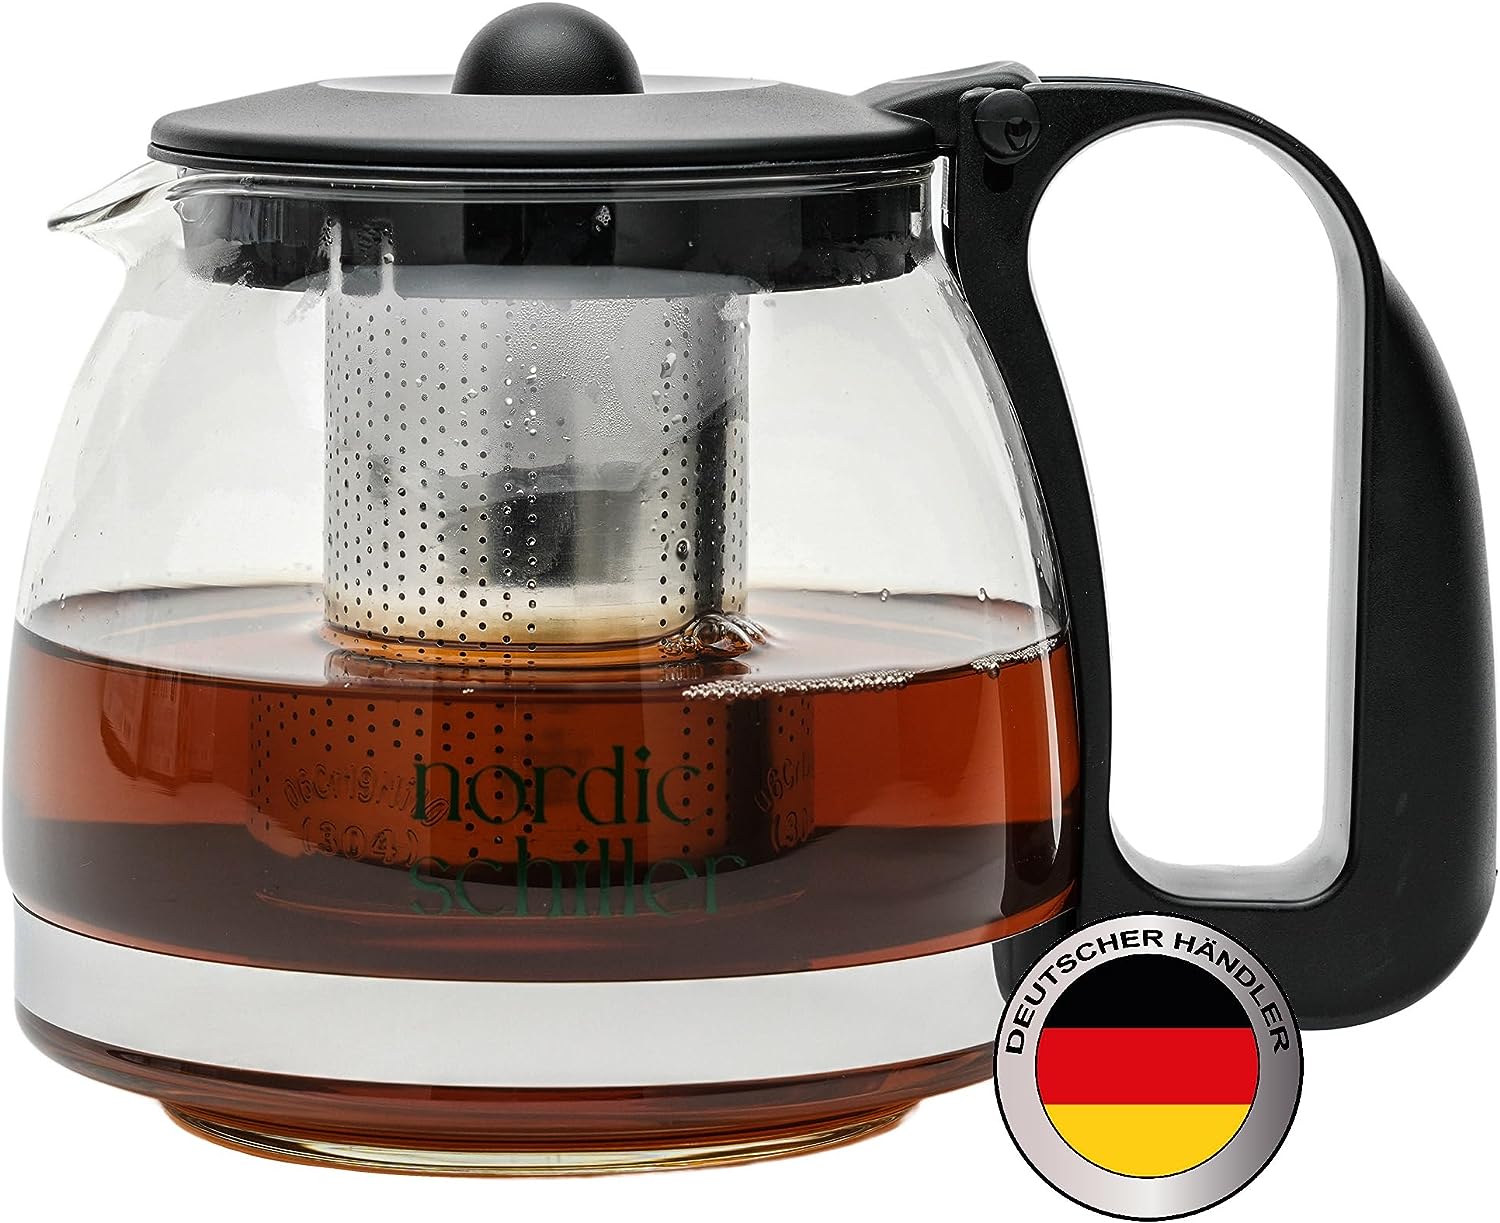 NORDIC SCHILLER Premium Glass Teapot, Heat-Resistant Glass Jug with Lid 1250 ml Teapot with Strainer Insert, Thermal Teapot with Stainless Steel Filter Strainer, Tea Maker, Teapot with Strainer Tea